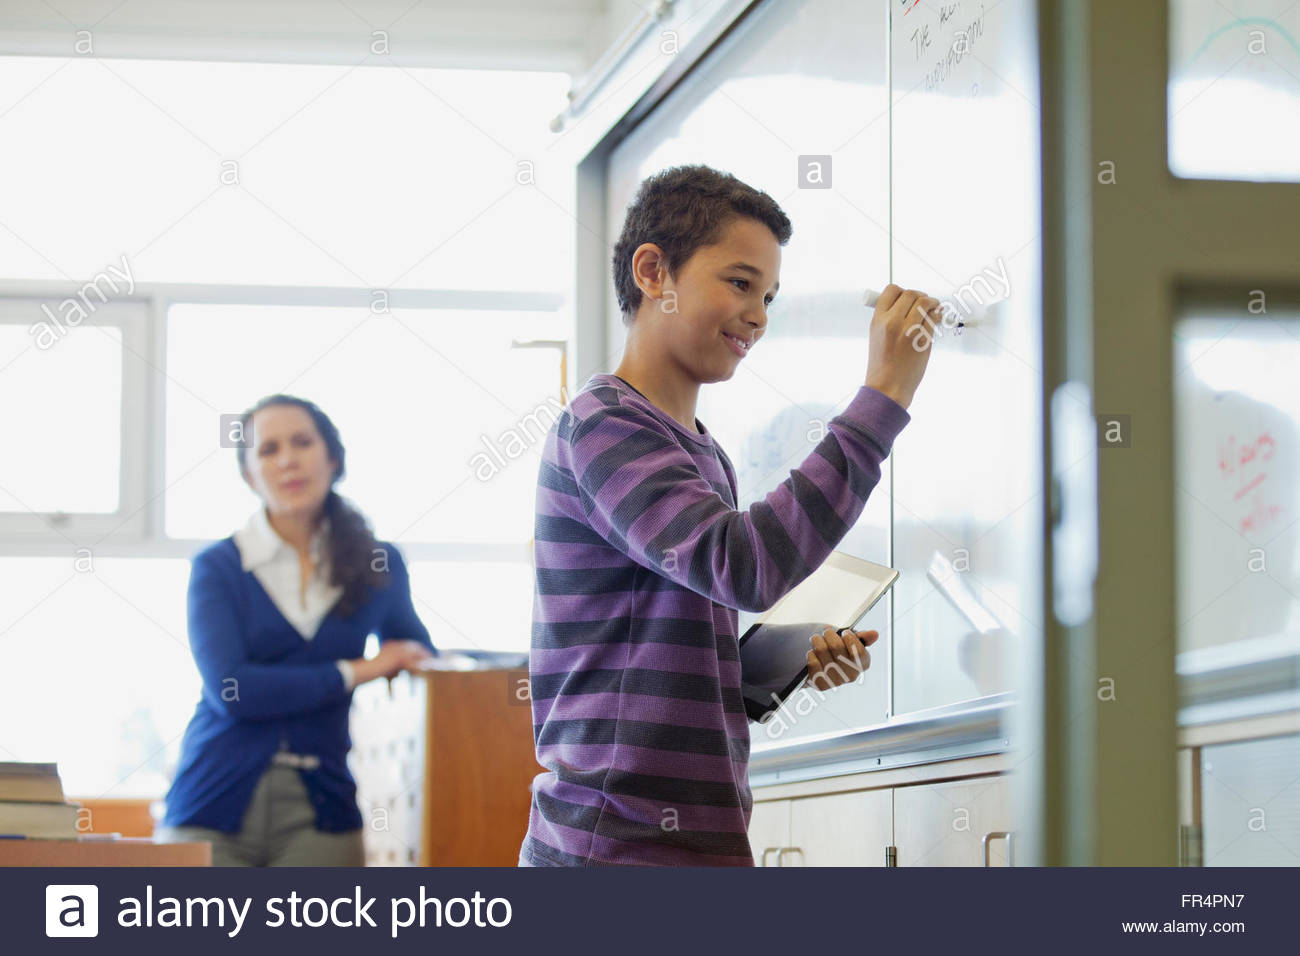 male middle school student presenting to class Stock Photo